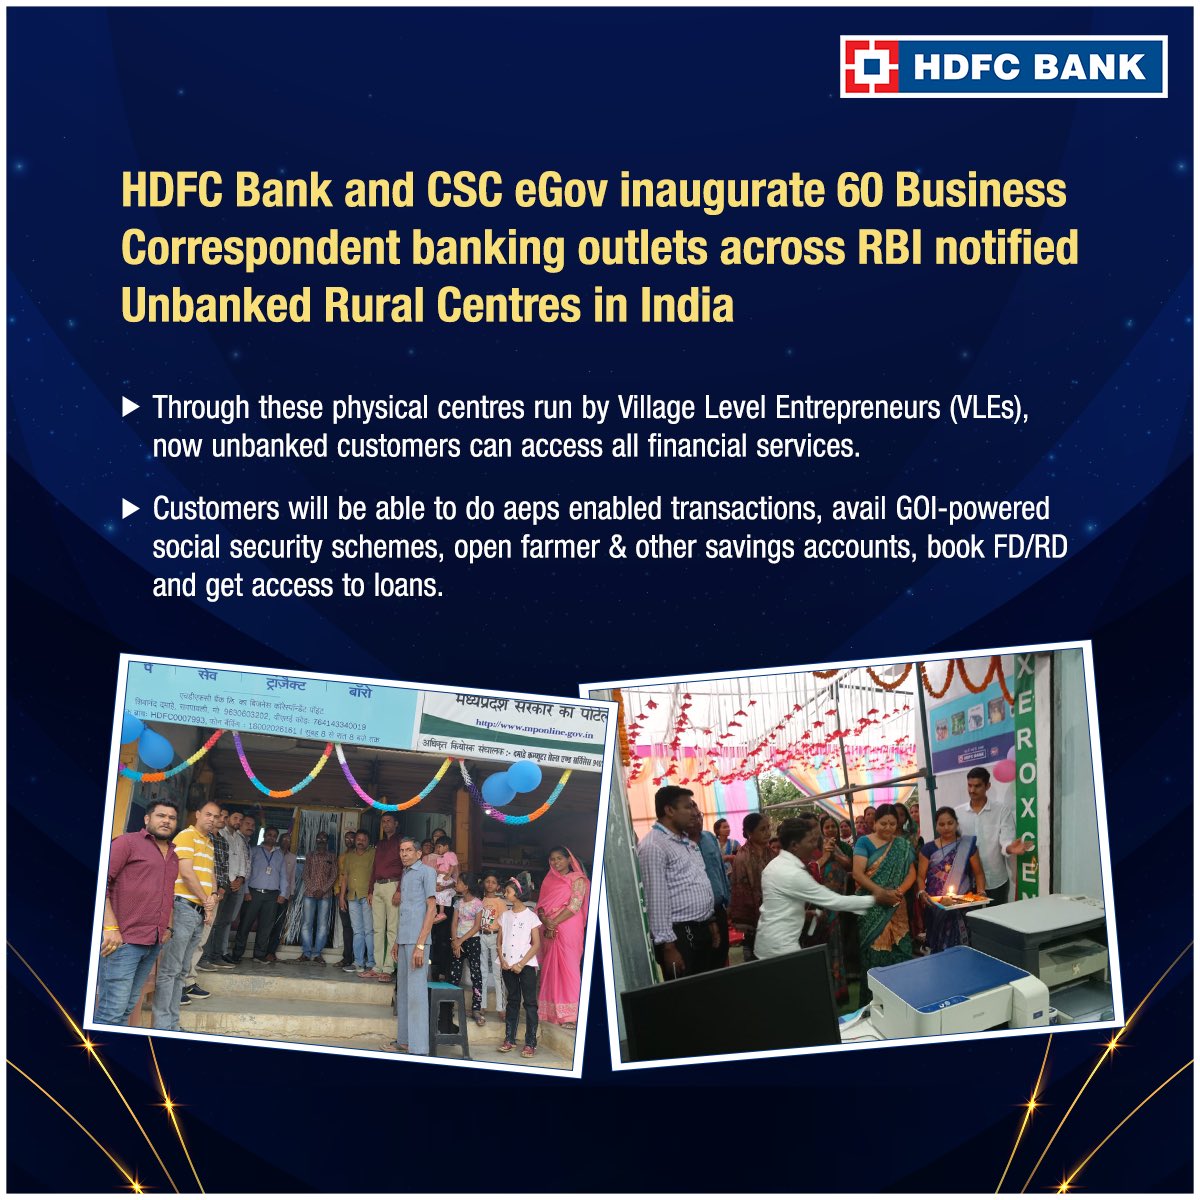 HDFC Bank in partnership with CSC eGov expands financial inclusion in rural & semi-urban India by launching 60 Banking Outlets across the RBI notified unbanked rural centres. Run by CSC VLE’s, these will provide unbanked customers with access to essential banking services like…